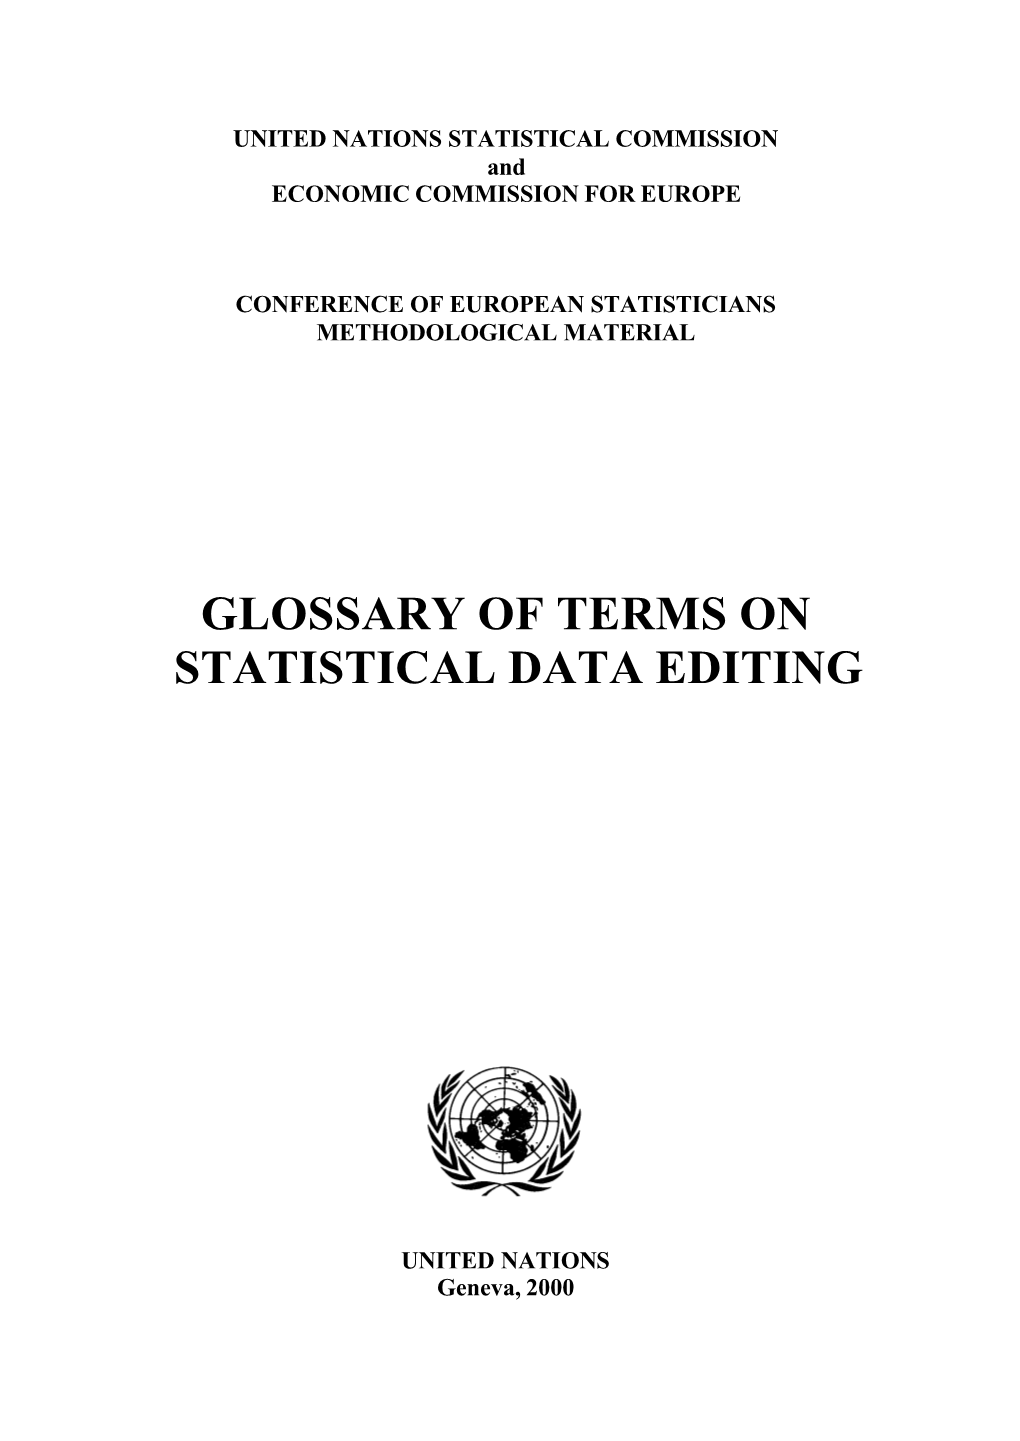 (2000). Glossary of Terms on Statistical Data Editing